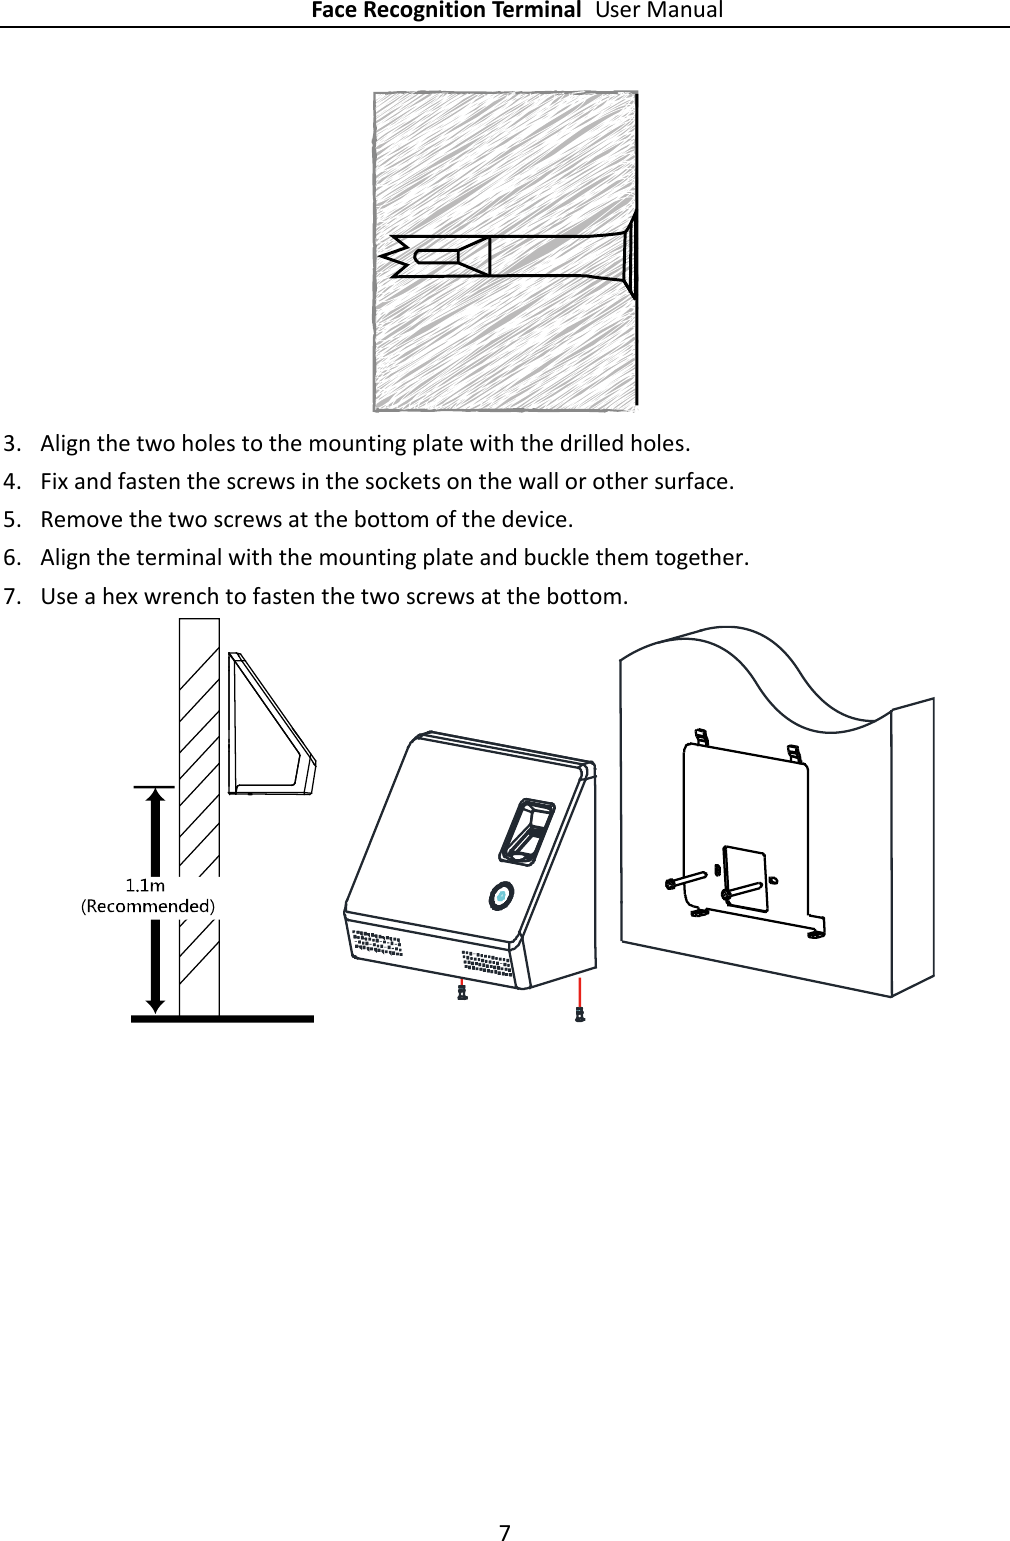 Face Recognition Terminal User Manual 7   3. Align the two holes to the mounting plate with the drilled holes. 4. Fix and fasten the screws in the sockets on the wall or other surface. 5. Remove the two screws at the bottom of the device. 6. Align the terminal with the mounting plate and buckle them together. 7. Use a hex wrench to fasten the two screws at the bottom.      